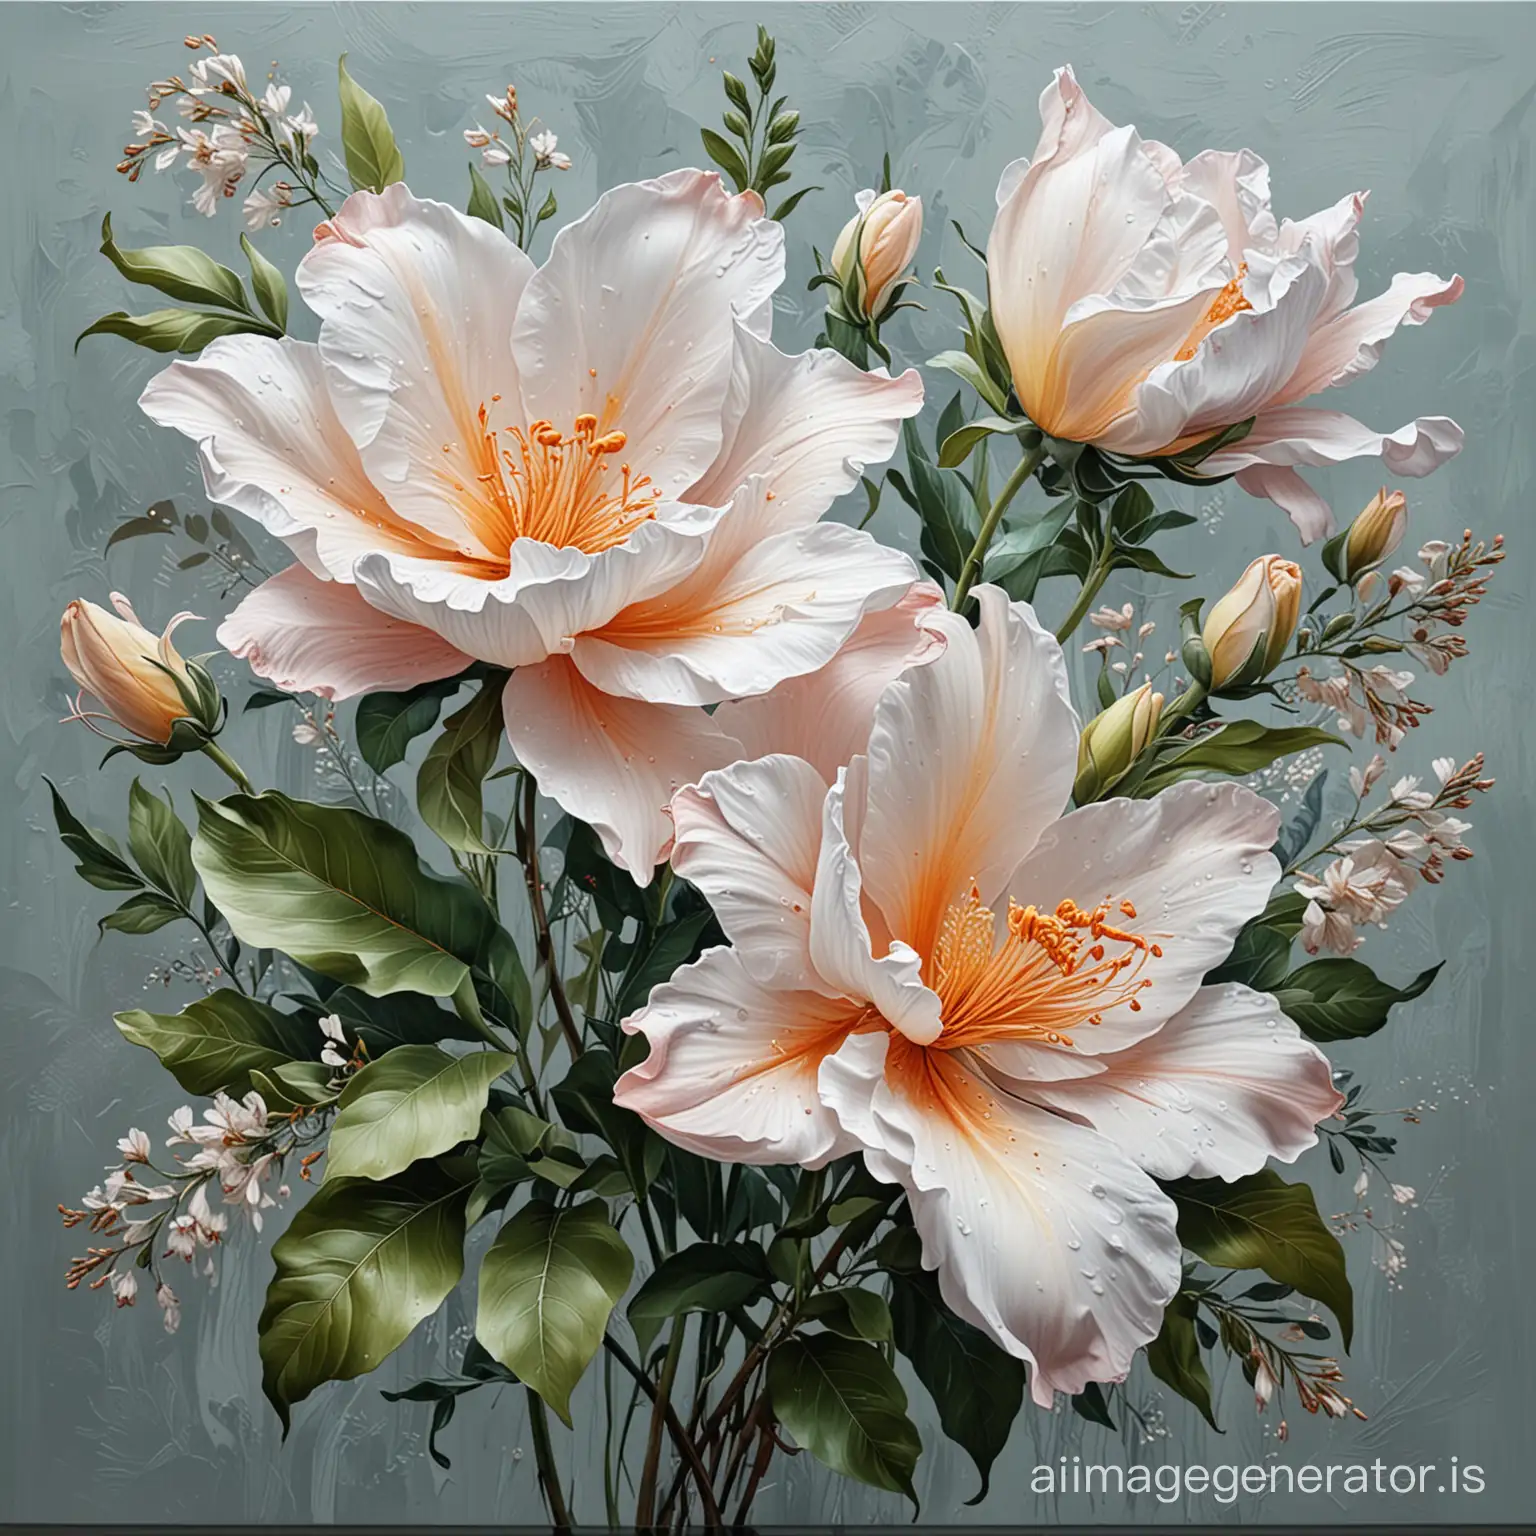 A hyperrealistic Graceful floral painting with thick strokes of impasto